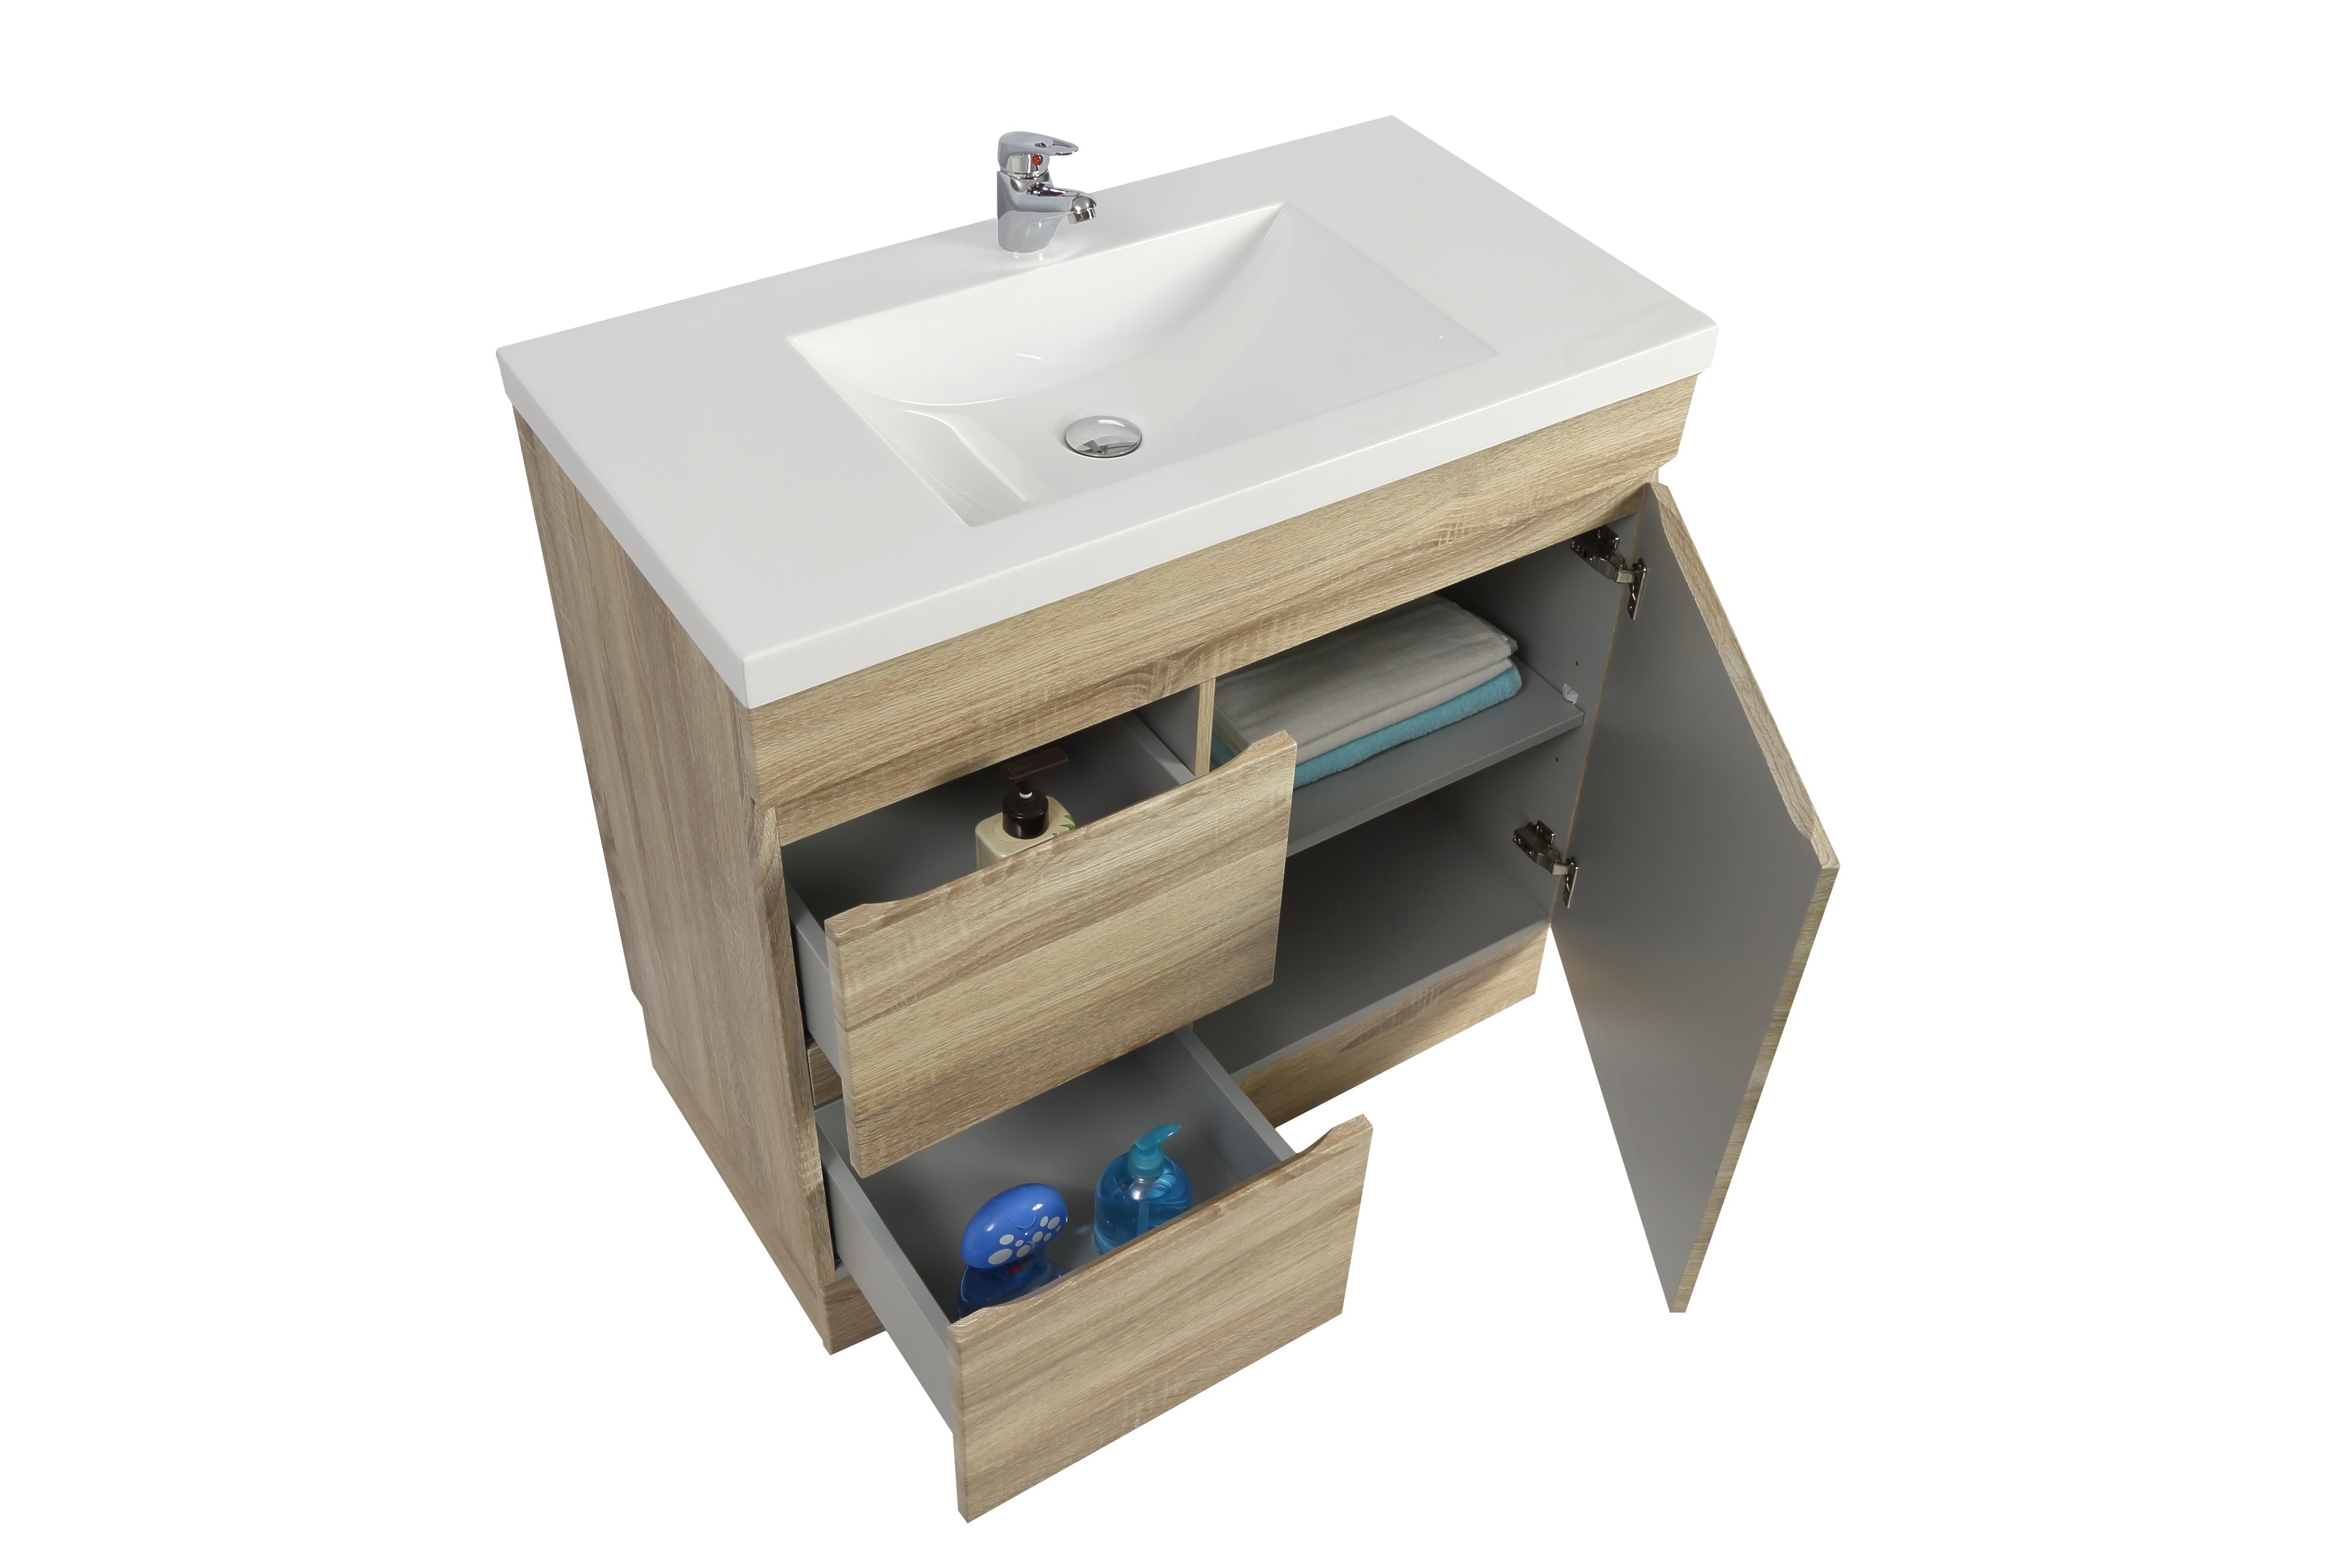 POSEIDON WHITE OAK 750MM SPACE SAVING SINGLE BOWL FLOOR STANDING VANITY (AVAILABLE IN LEFT AND RIGHT HAND DRAWER)